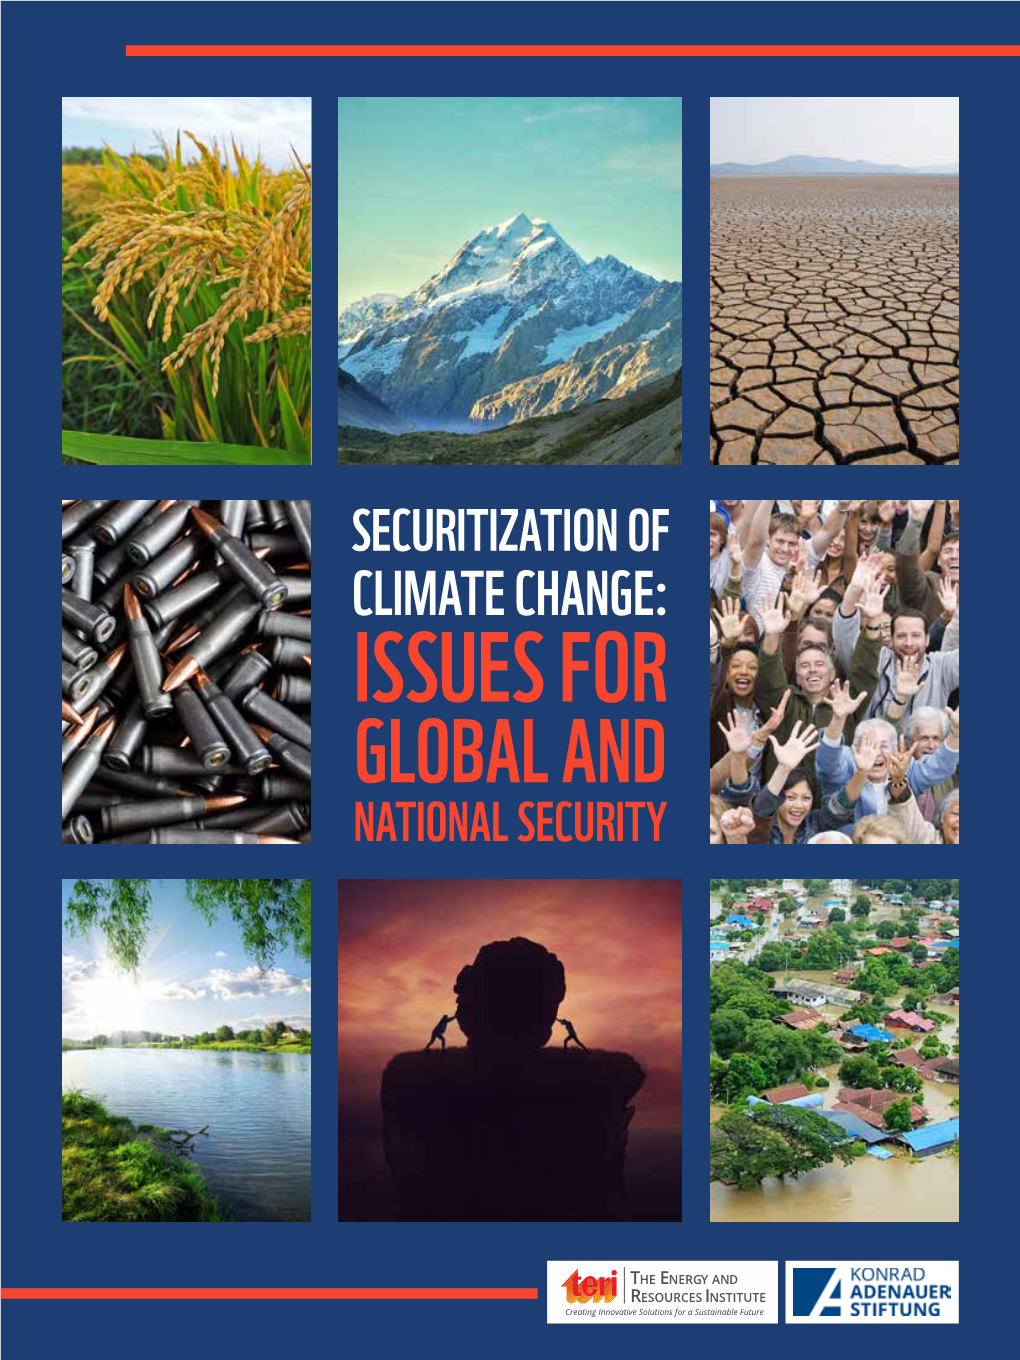 Issues for Global and National Security